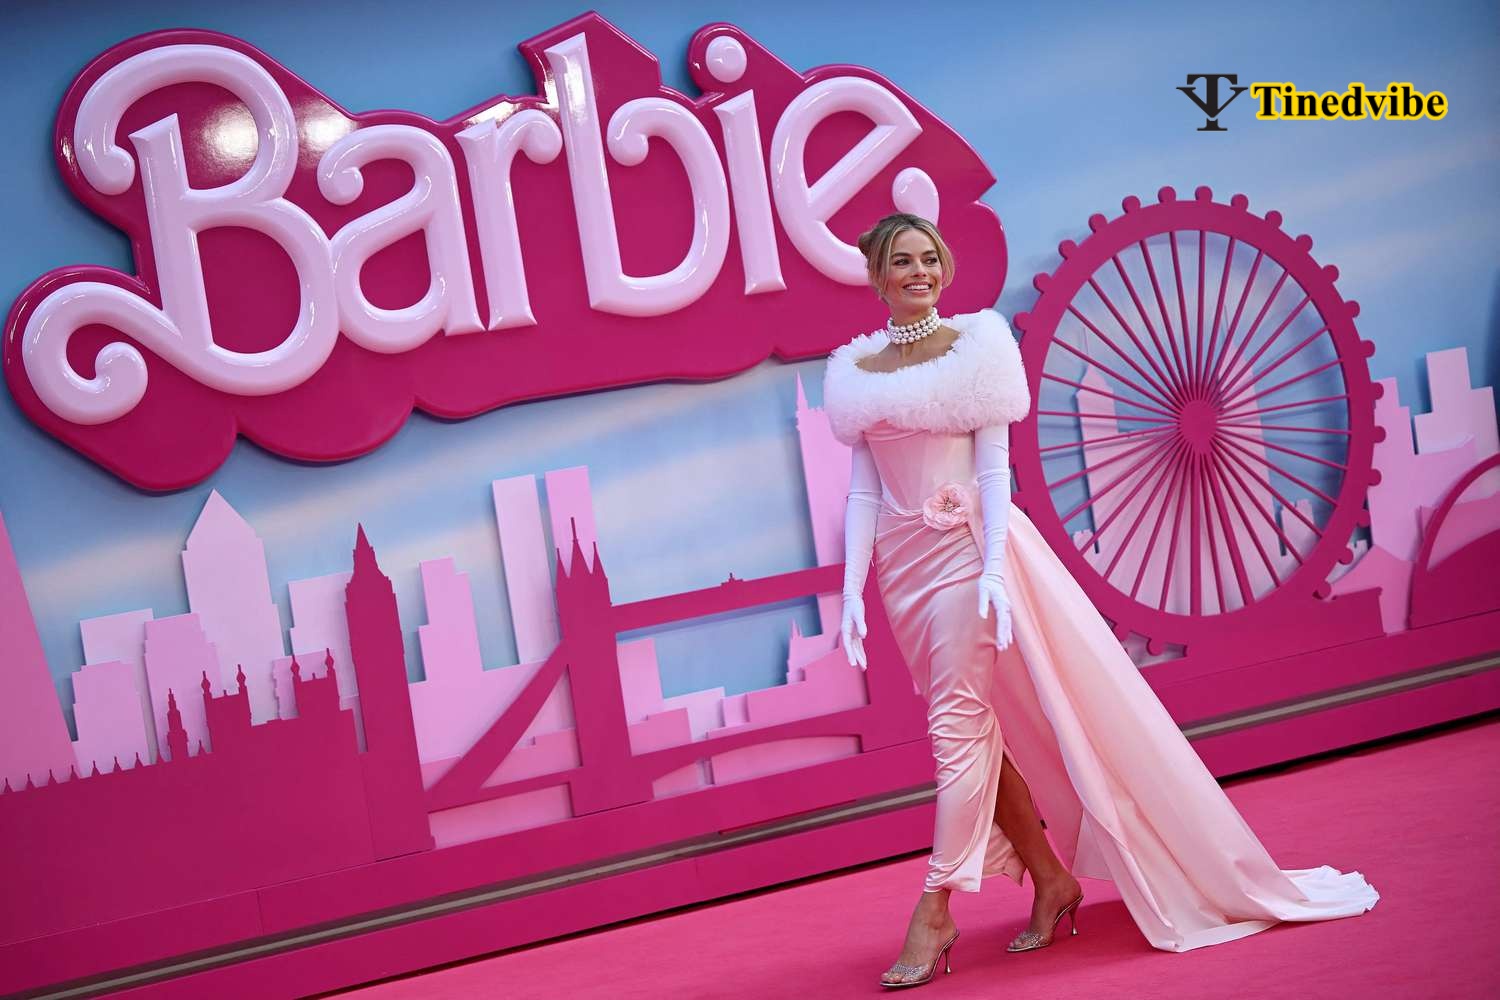 How long is the Barbie movie?